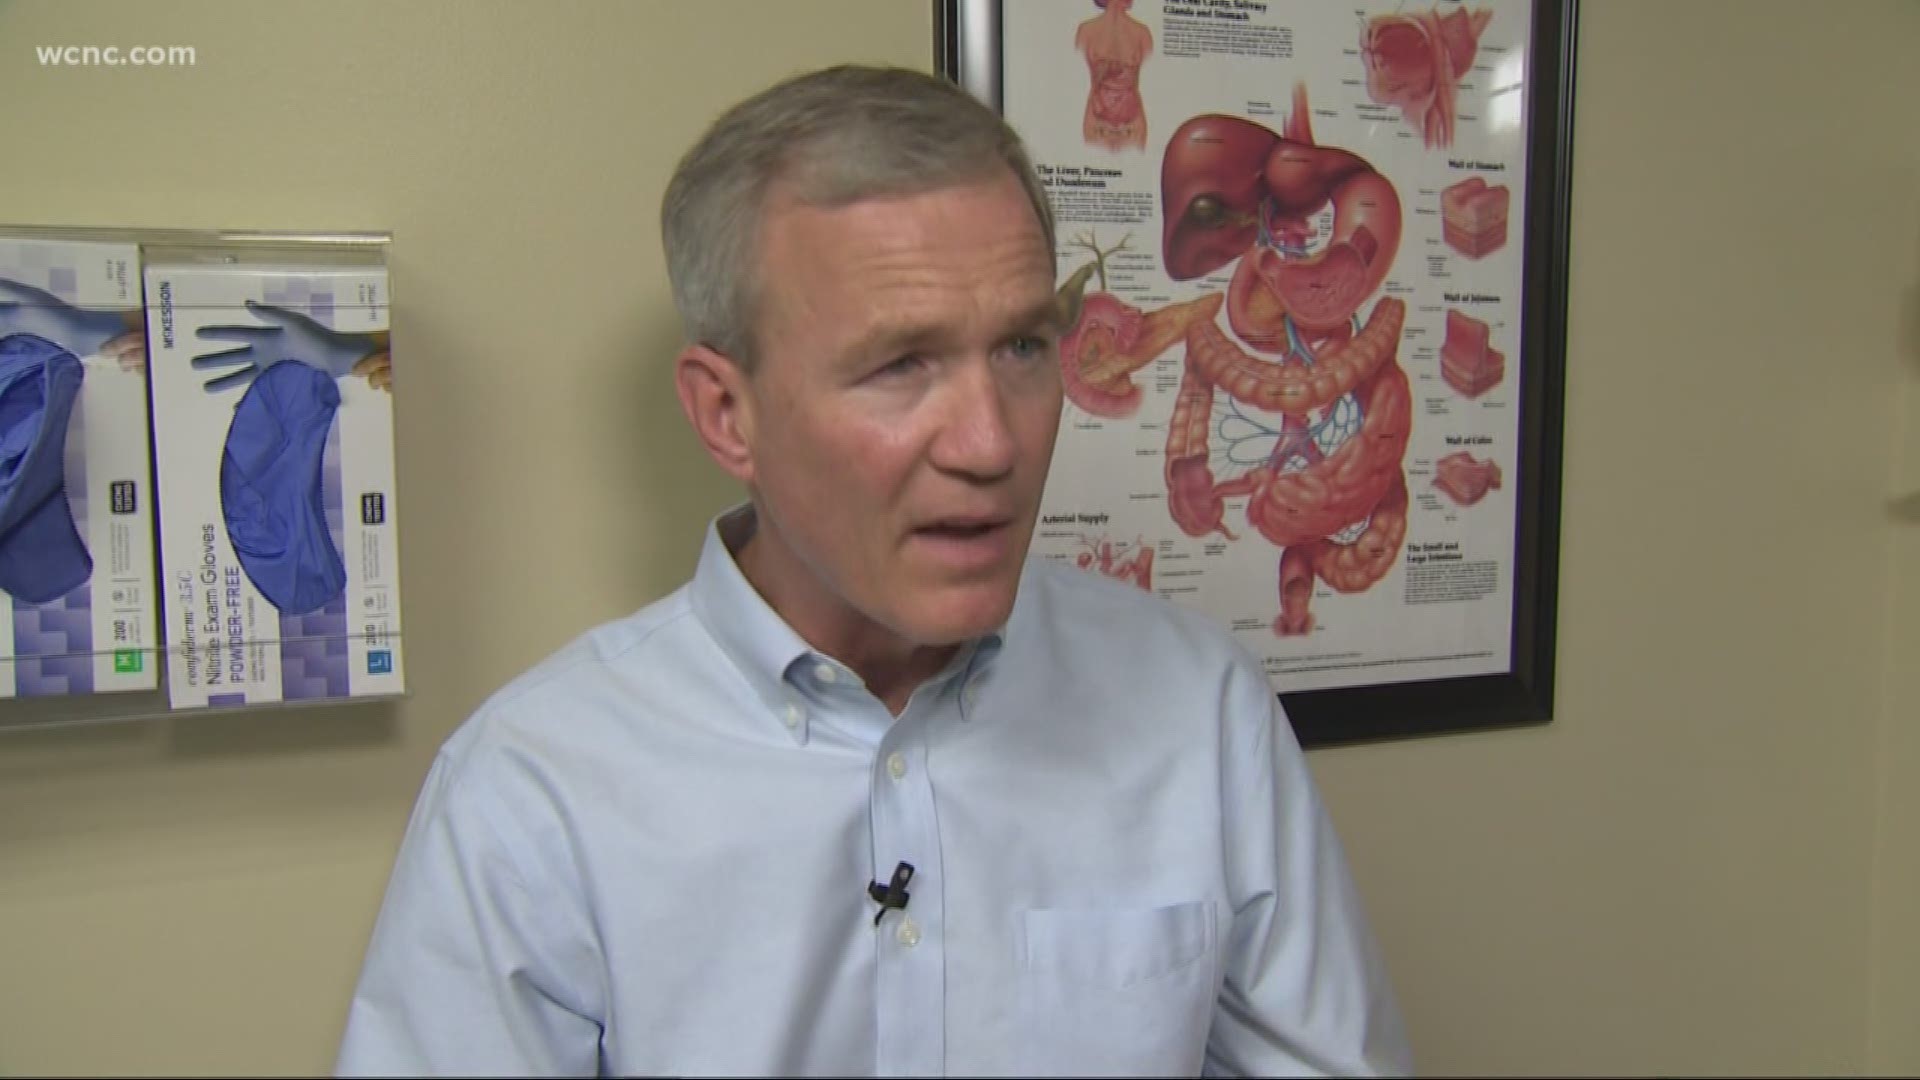 Dr. Stephen Deal from Carolina Digestive Health Associates has information you need to hear